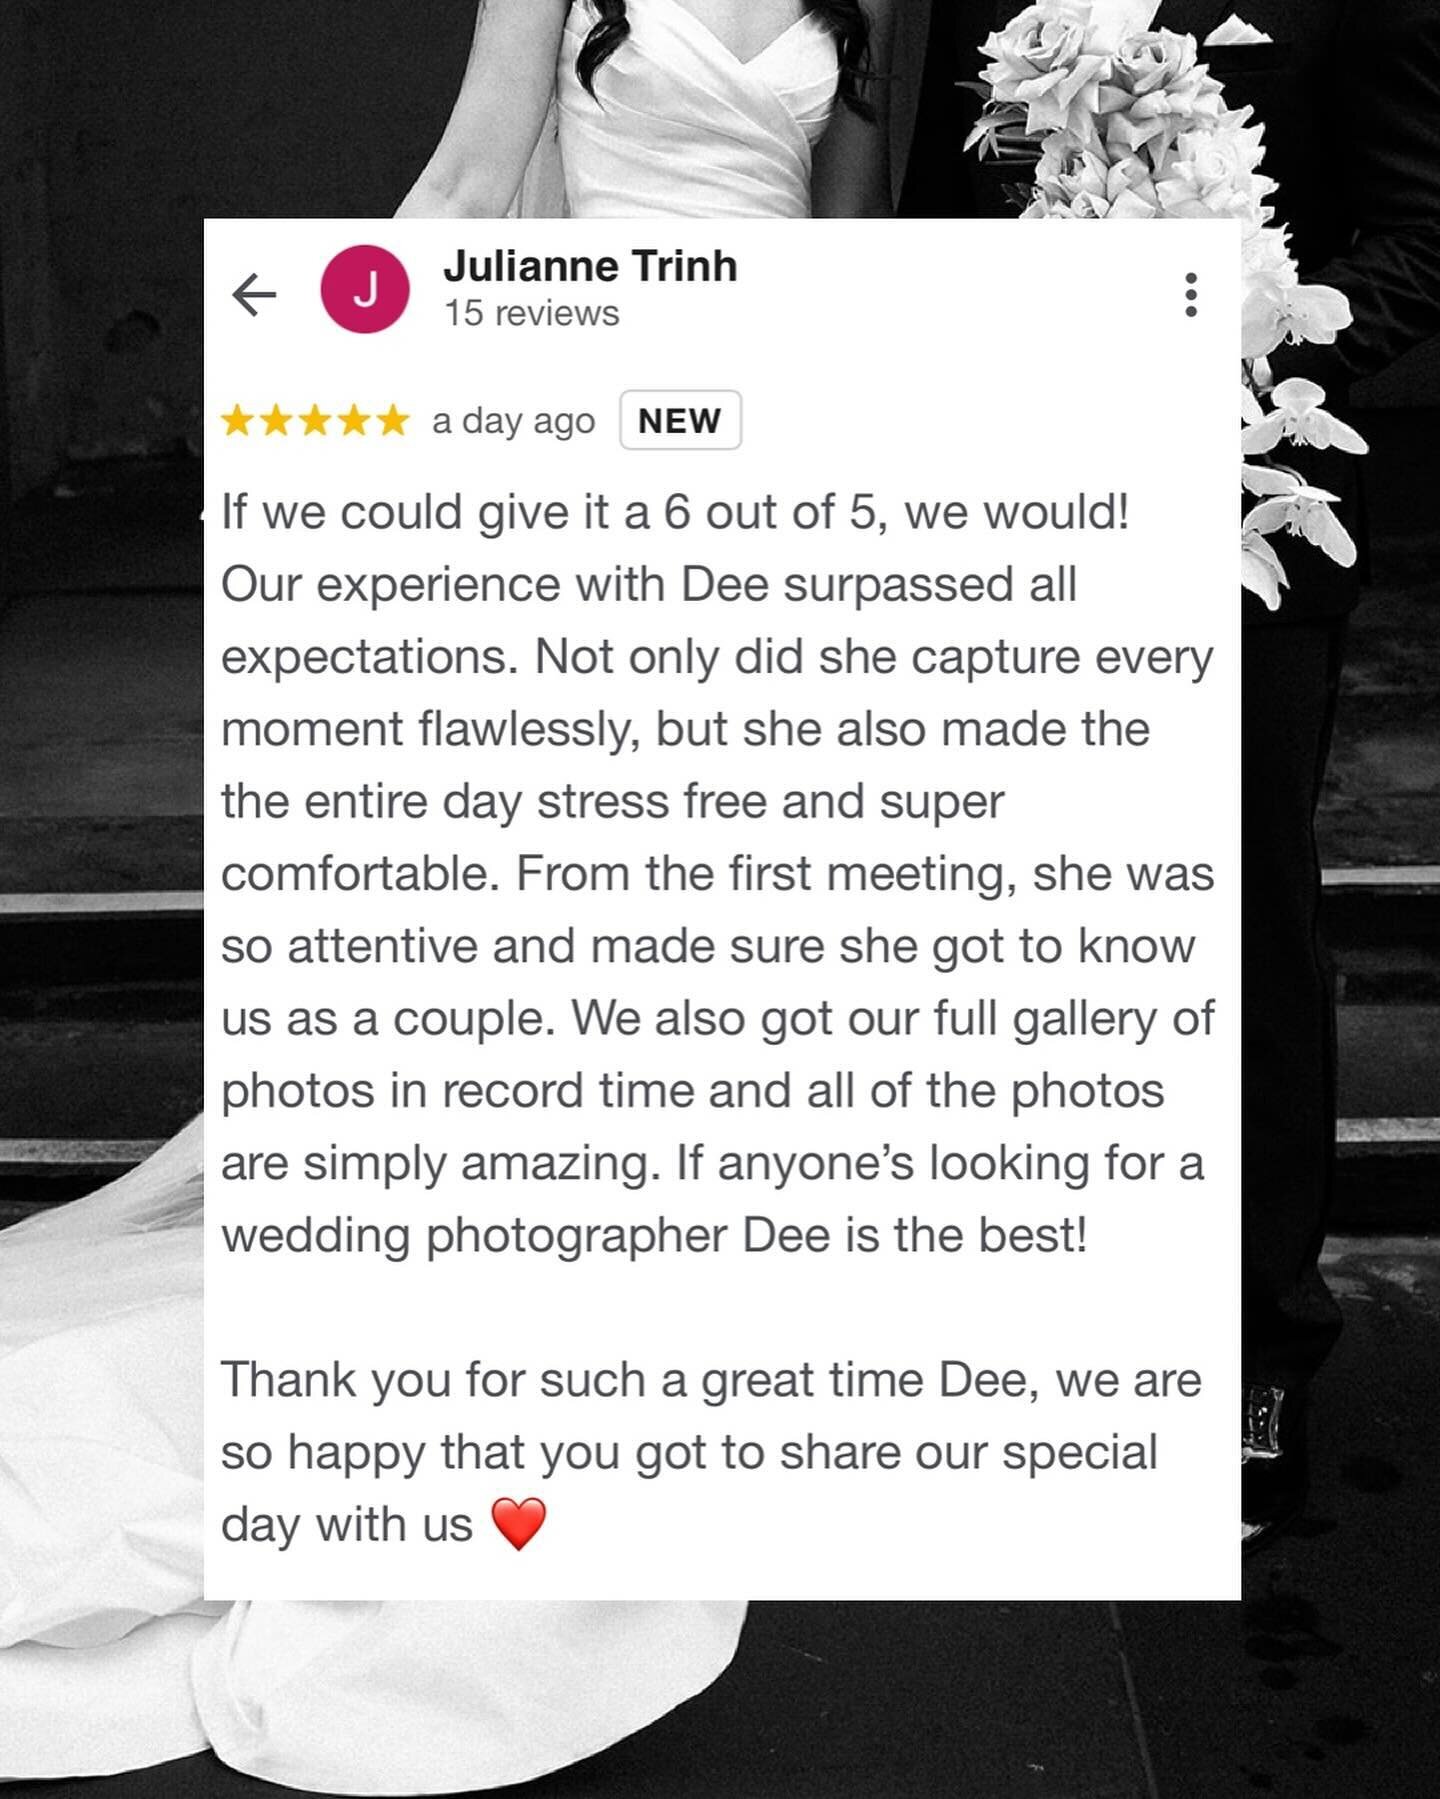 Kind words from Jules and John&hellip;

&ldquo;If we could give it a 6 out of 5, we would! Our experience with Dee surpassed all expectations. Not only did she capture every moment flawlessly, but she also made the the entire day stress free and supe